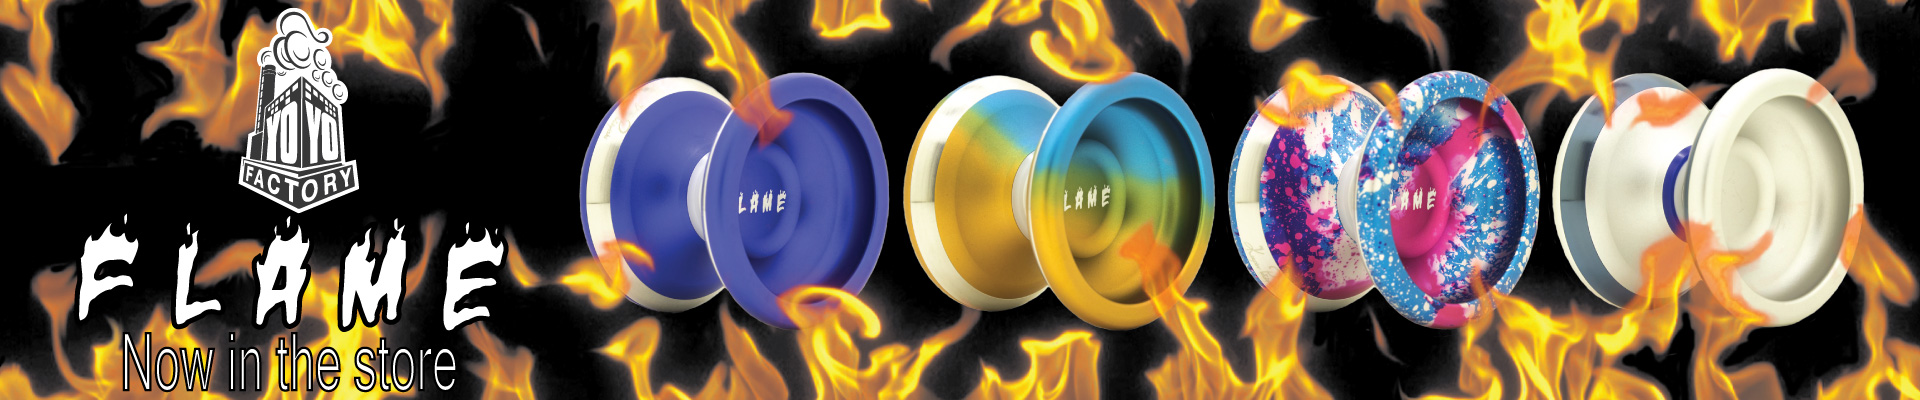 YoYoFactory Flame now in the store